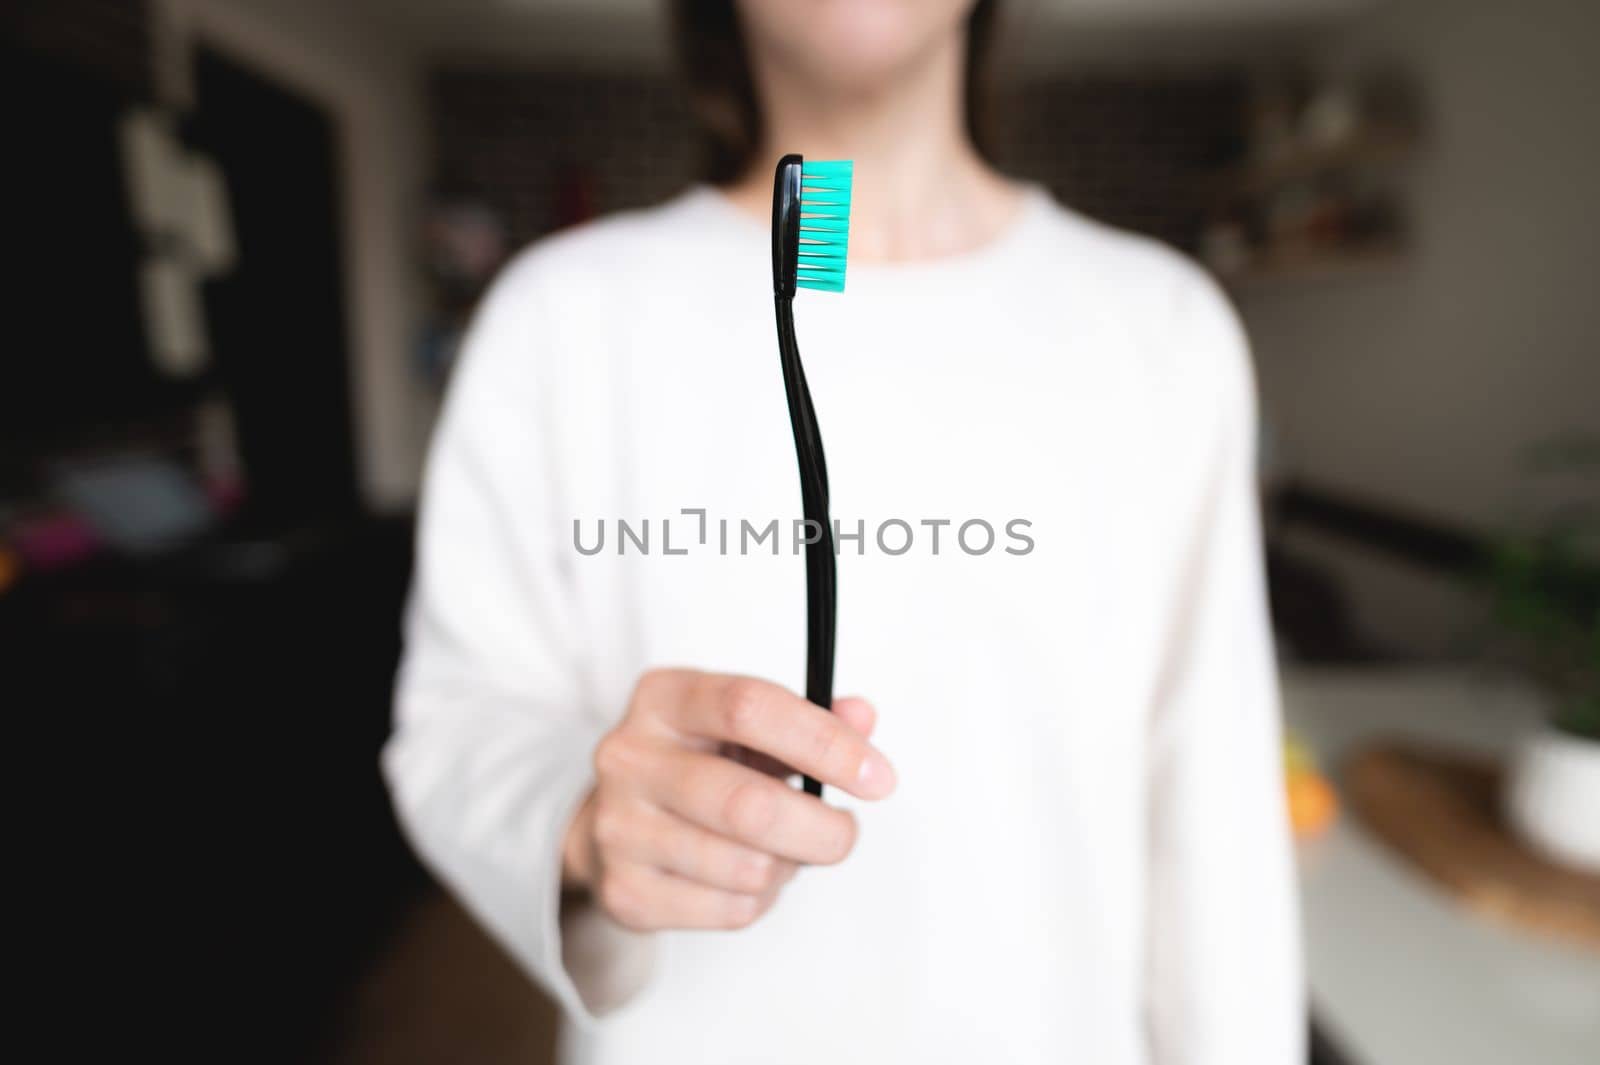 Woman holding a toothbrush in the foreground in focus, blurred background. Oral hygiene.